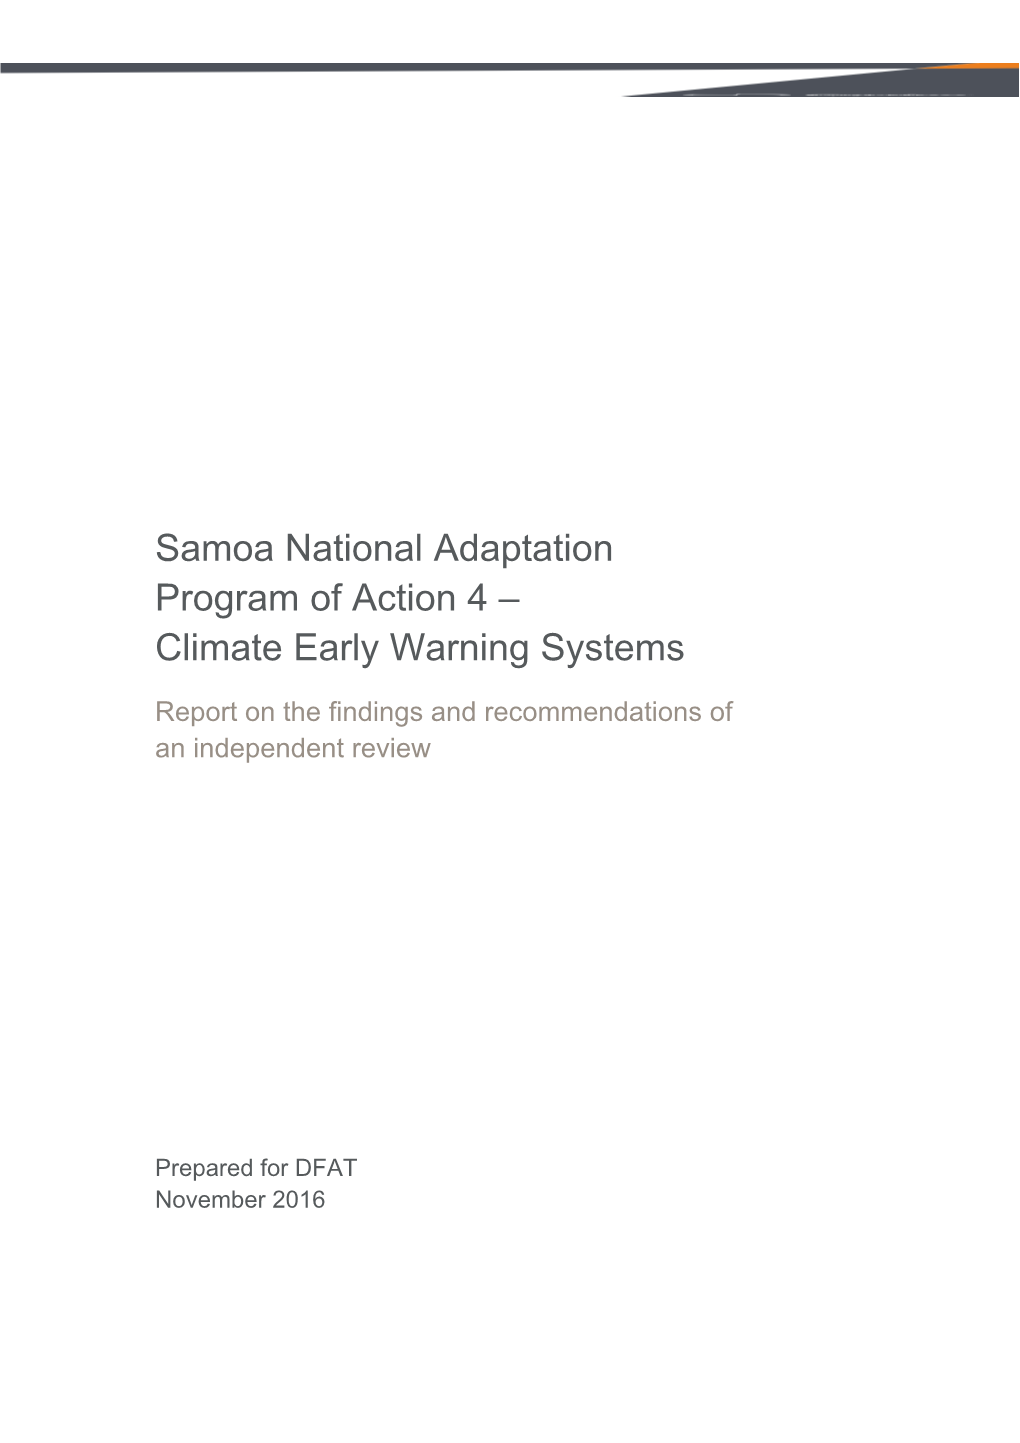 Report: Samoa National Adaptation Program of Action 4 Climate Early Warning Systems